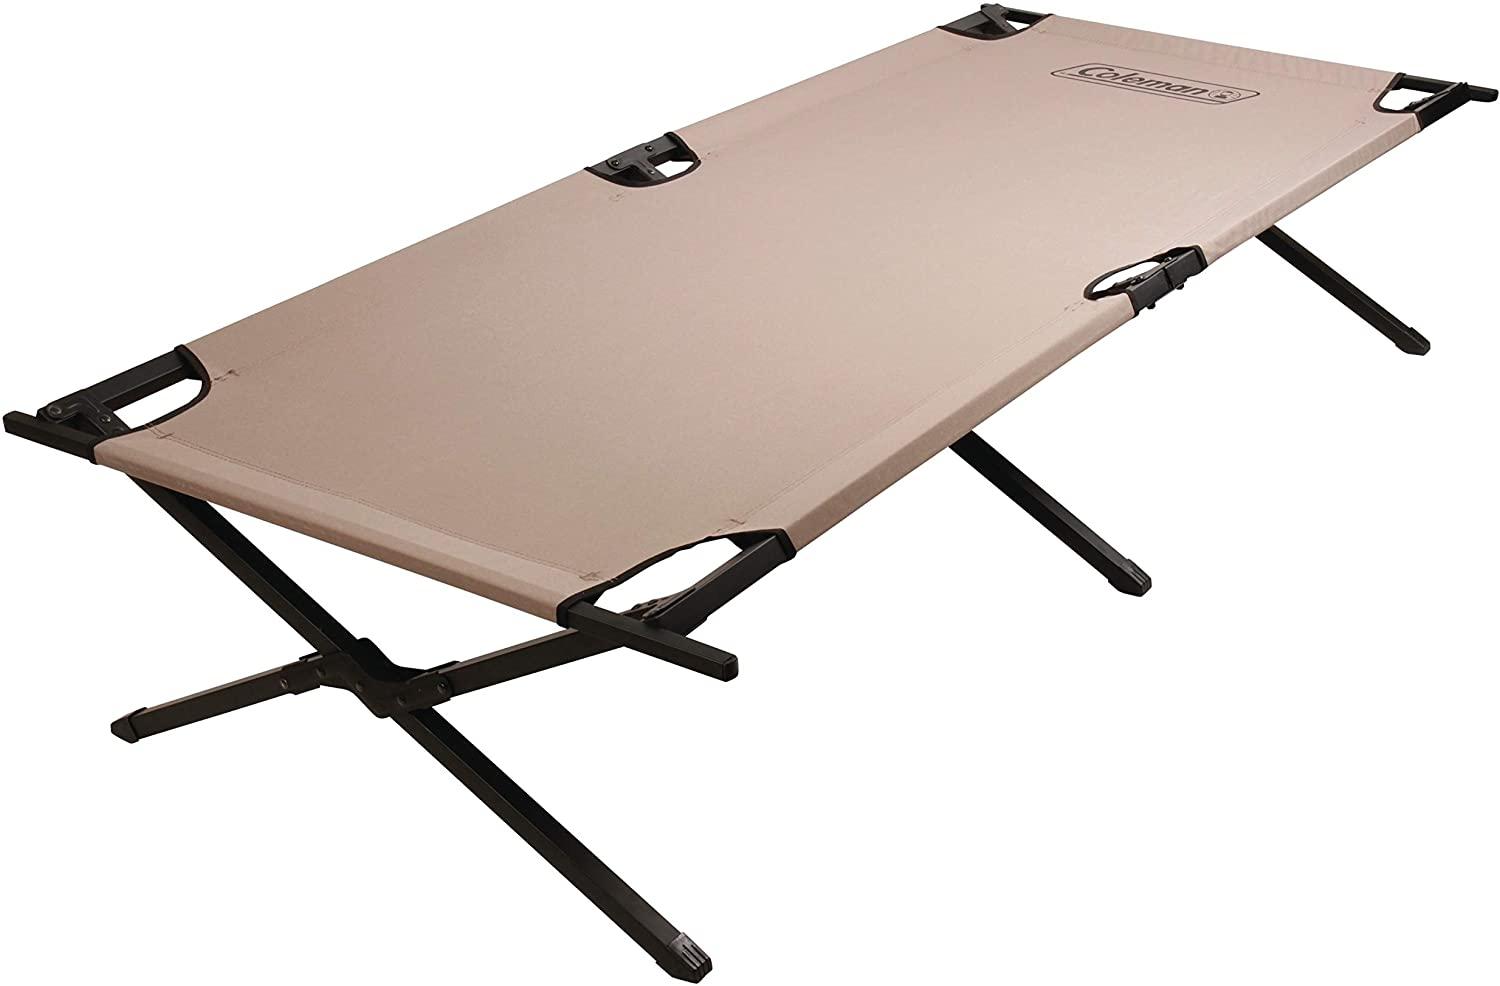 Coleman Trailhead II Military Camping Cot Bed for $38.82 Shipped